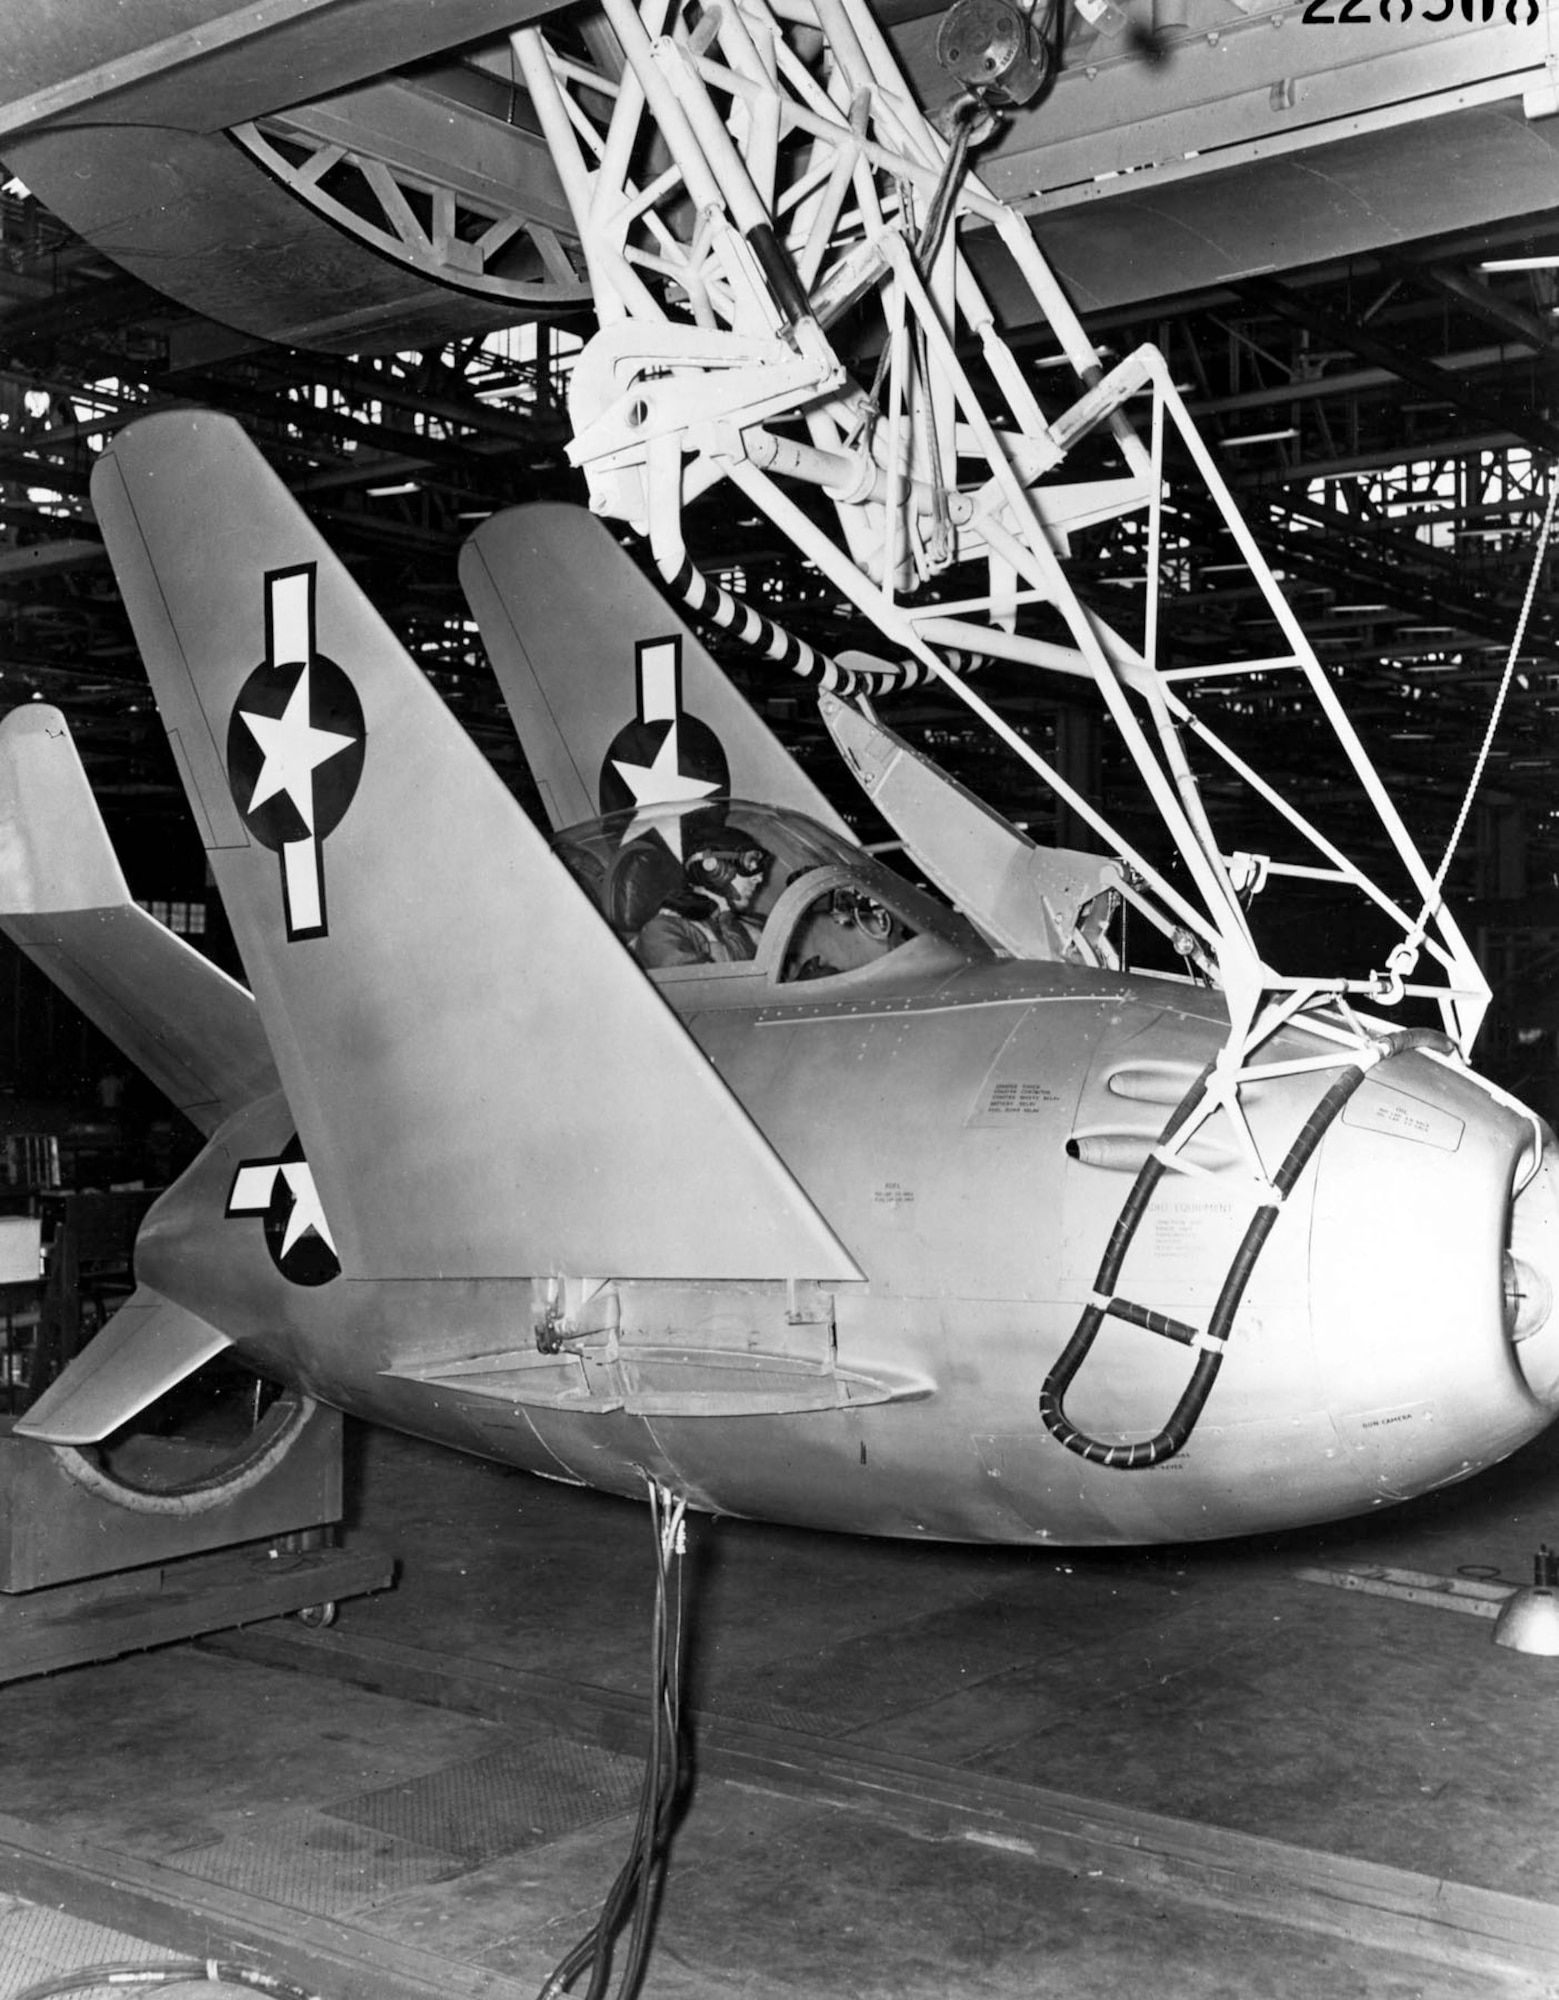 To fit inside the parent aircraft’s bomb bay, the XF-85’s wings folded up. (U.S. Air Force photo)